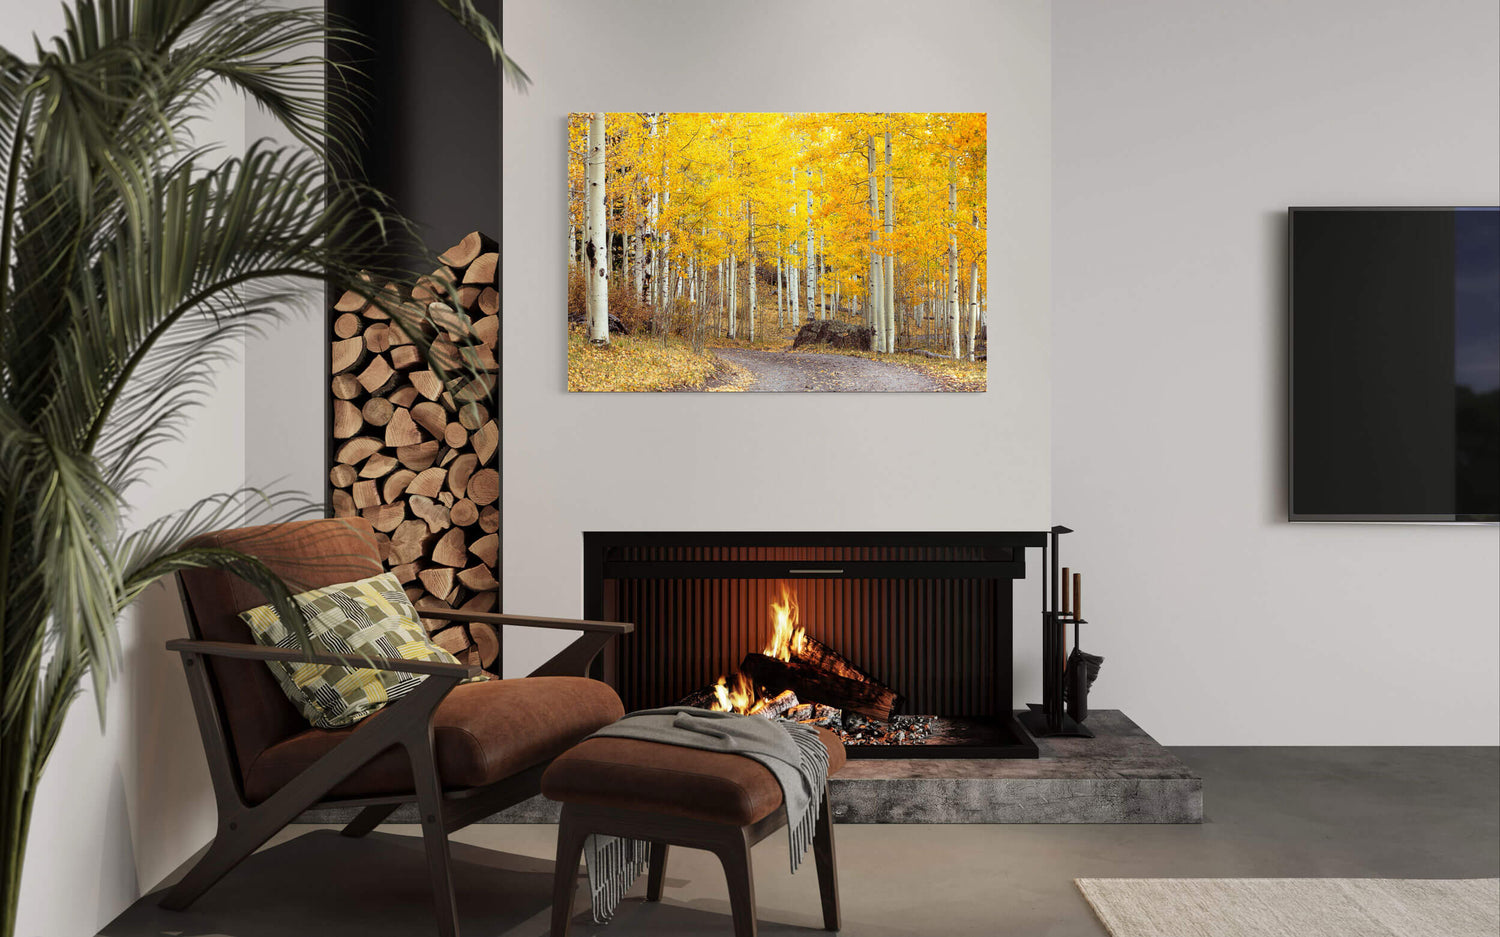 A Colorado fall colors picture from Owl Creek Pass hangs in a living room.